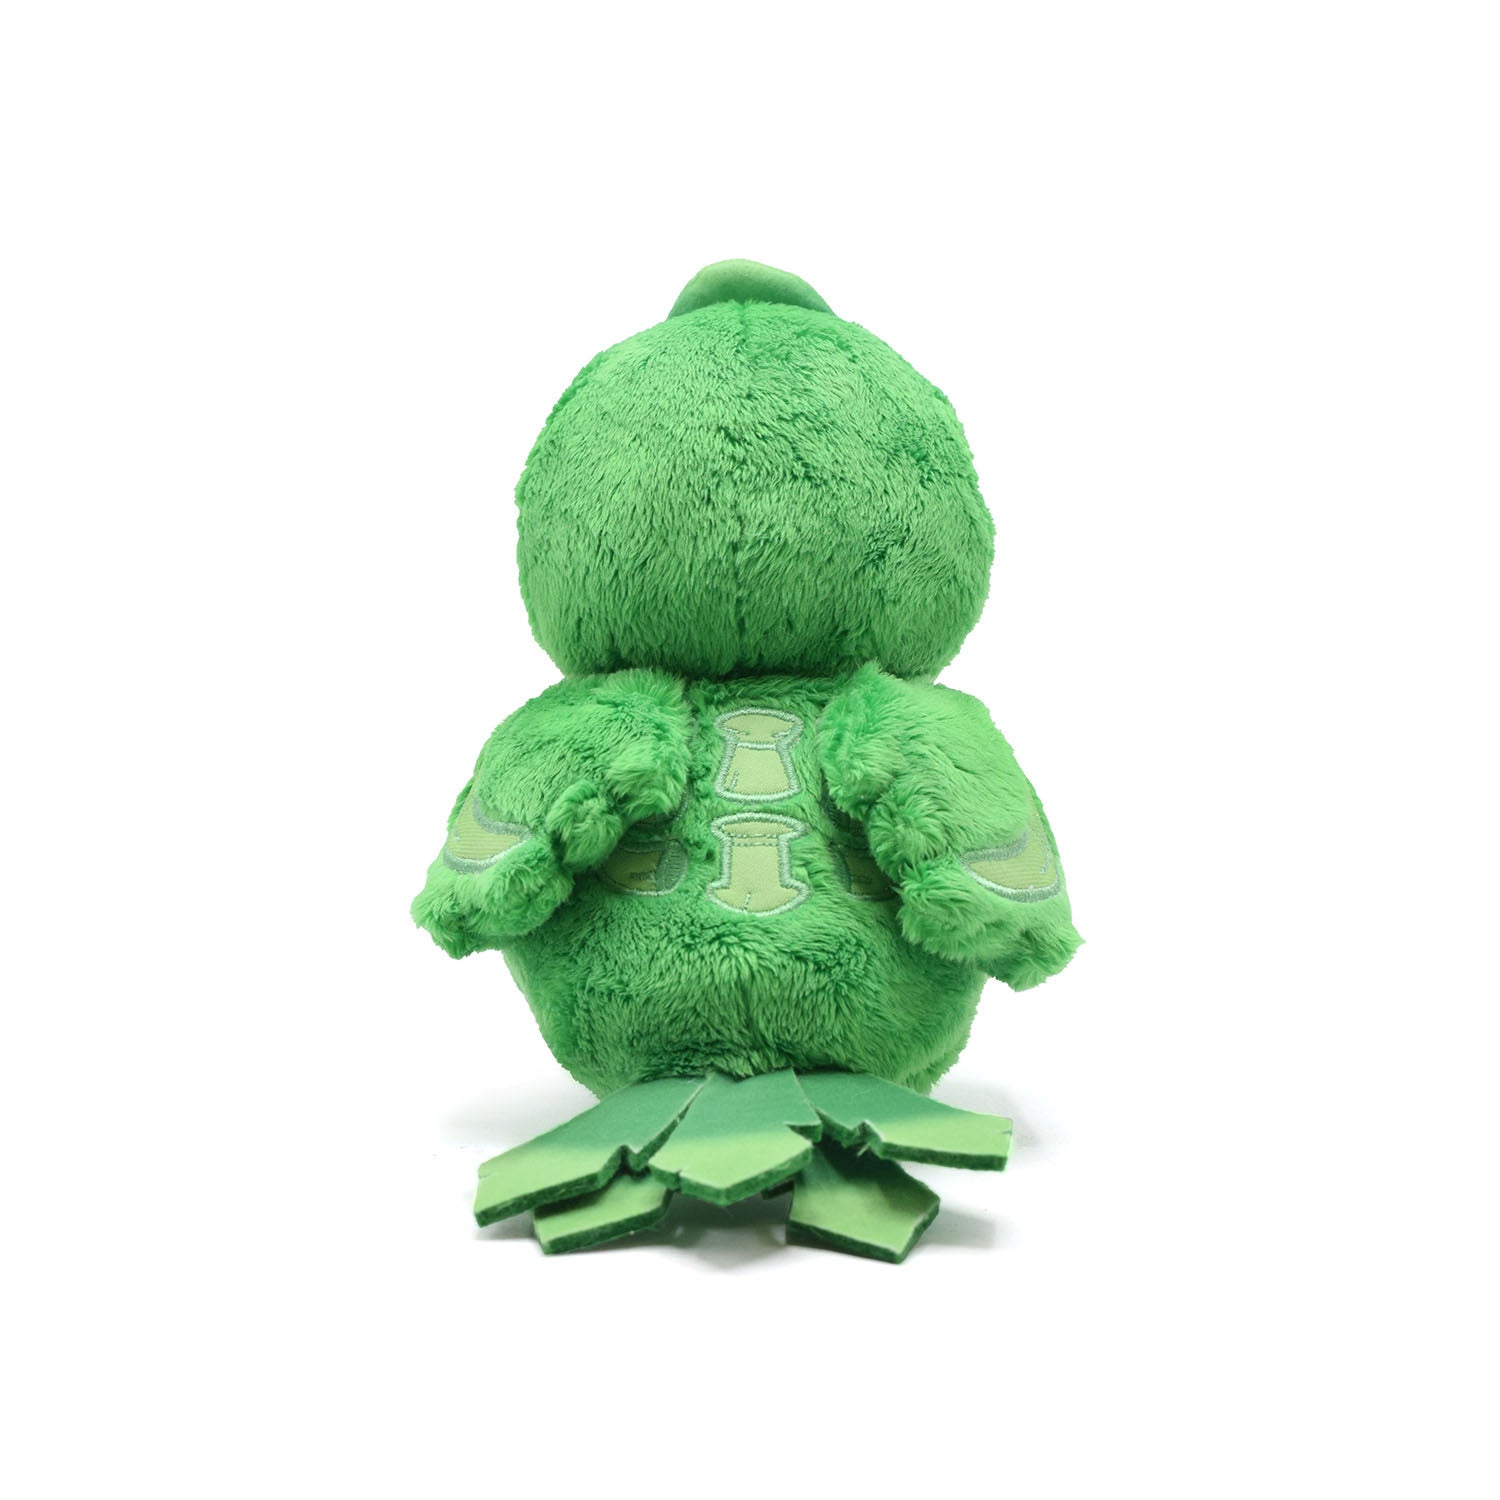 World of Warcraft Pepe Maldraxxus 9in Plush in Green - Back View